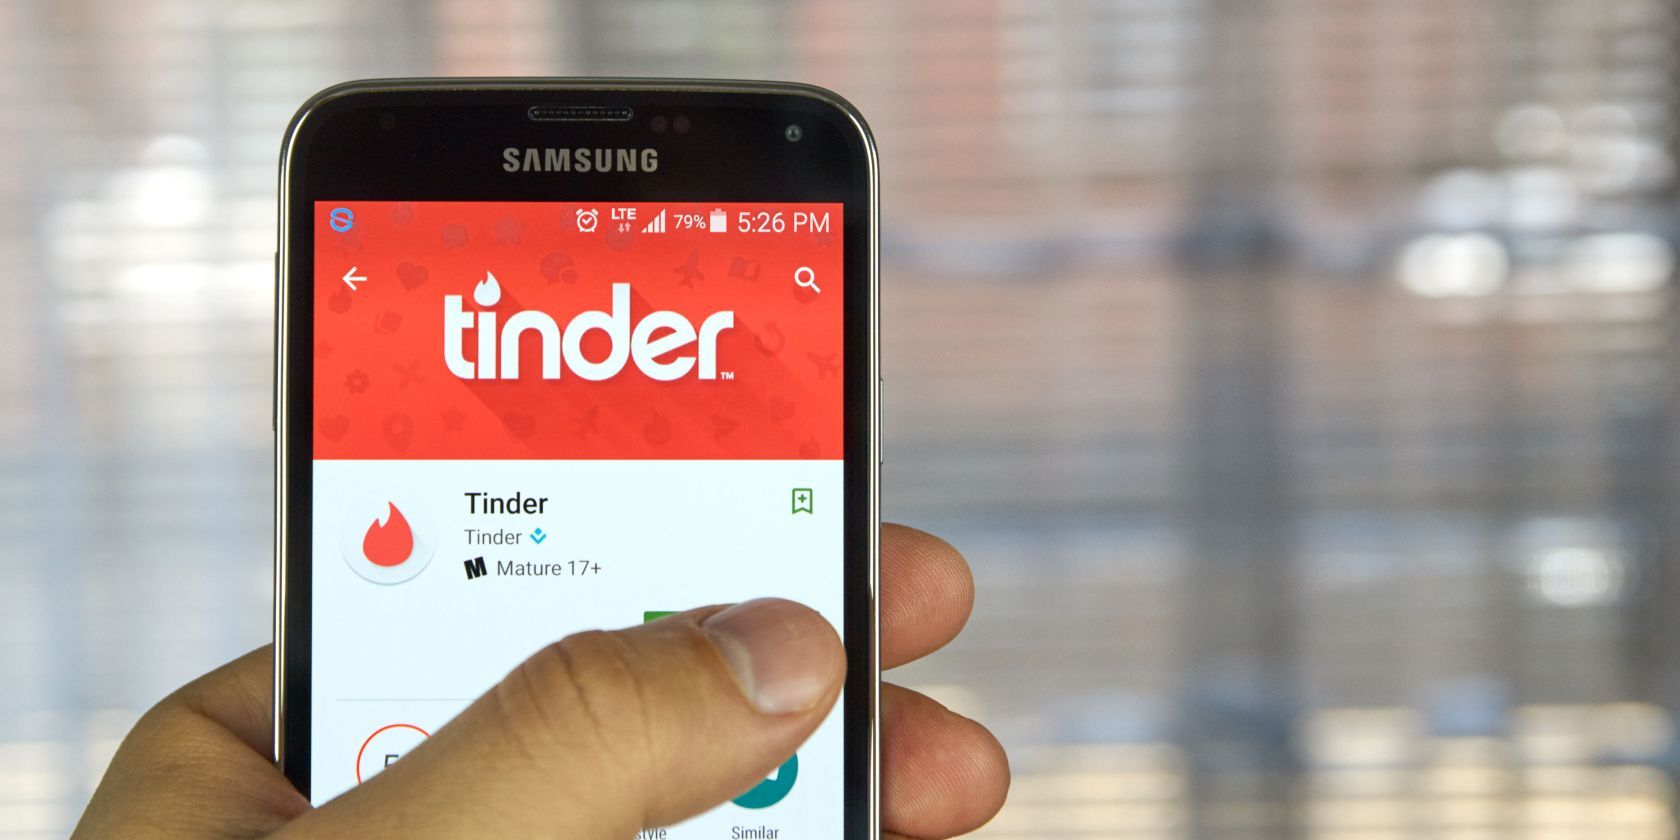 Tinder dating app for pc